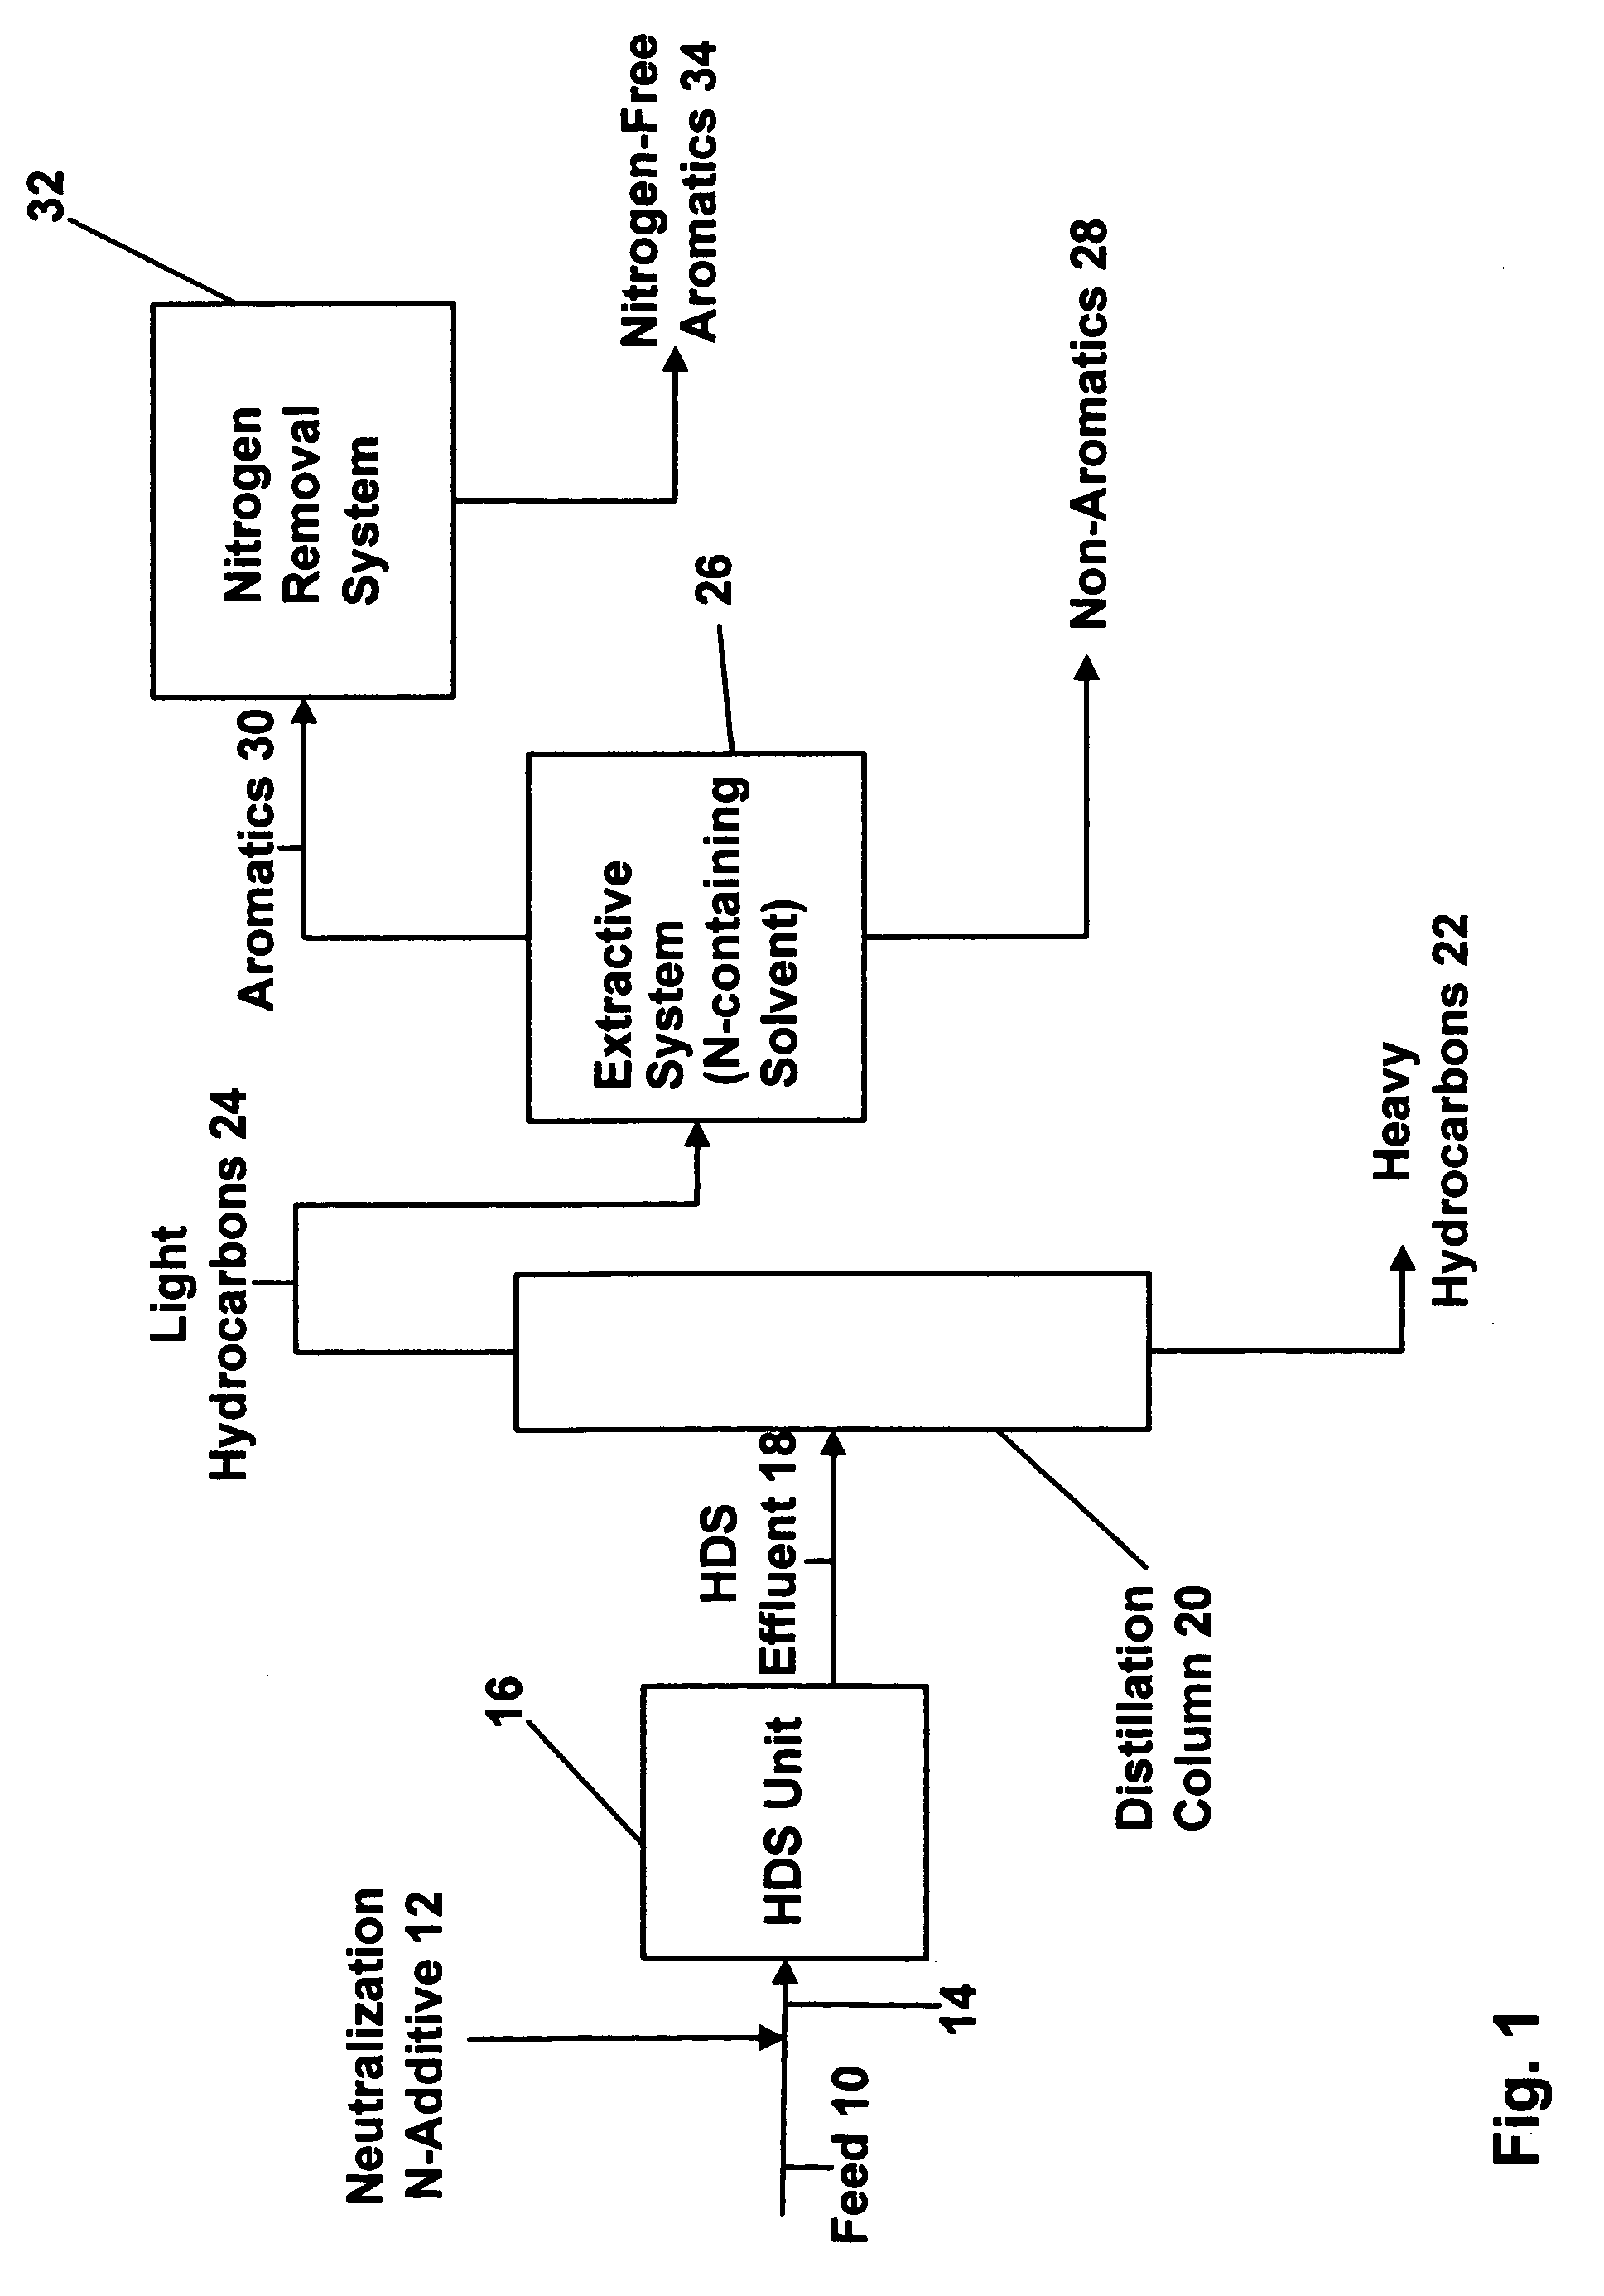 Process for producing petroleum oils with ultra-low nitrogen content